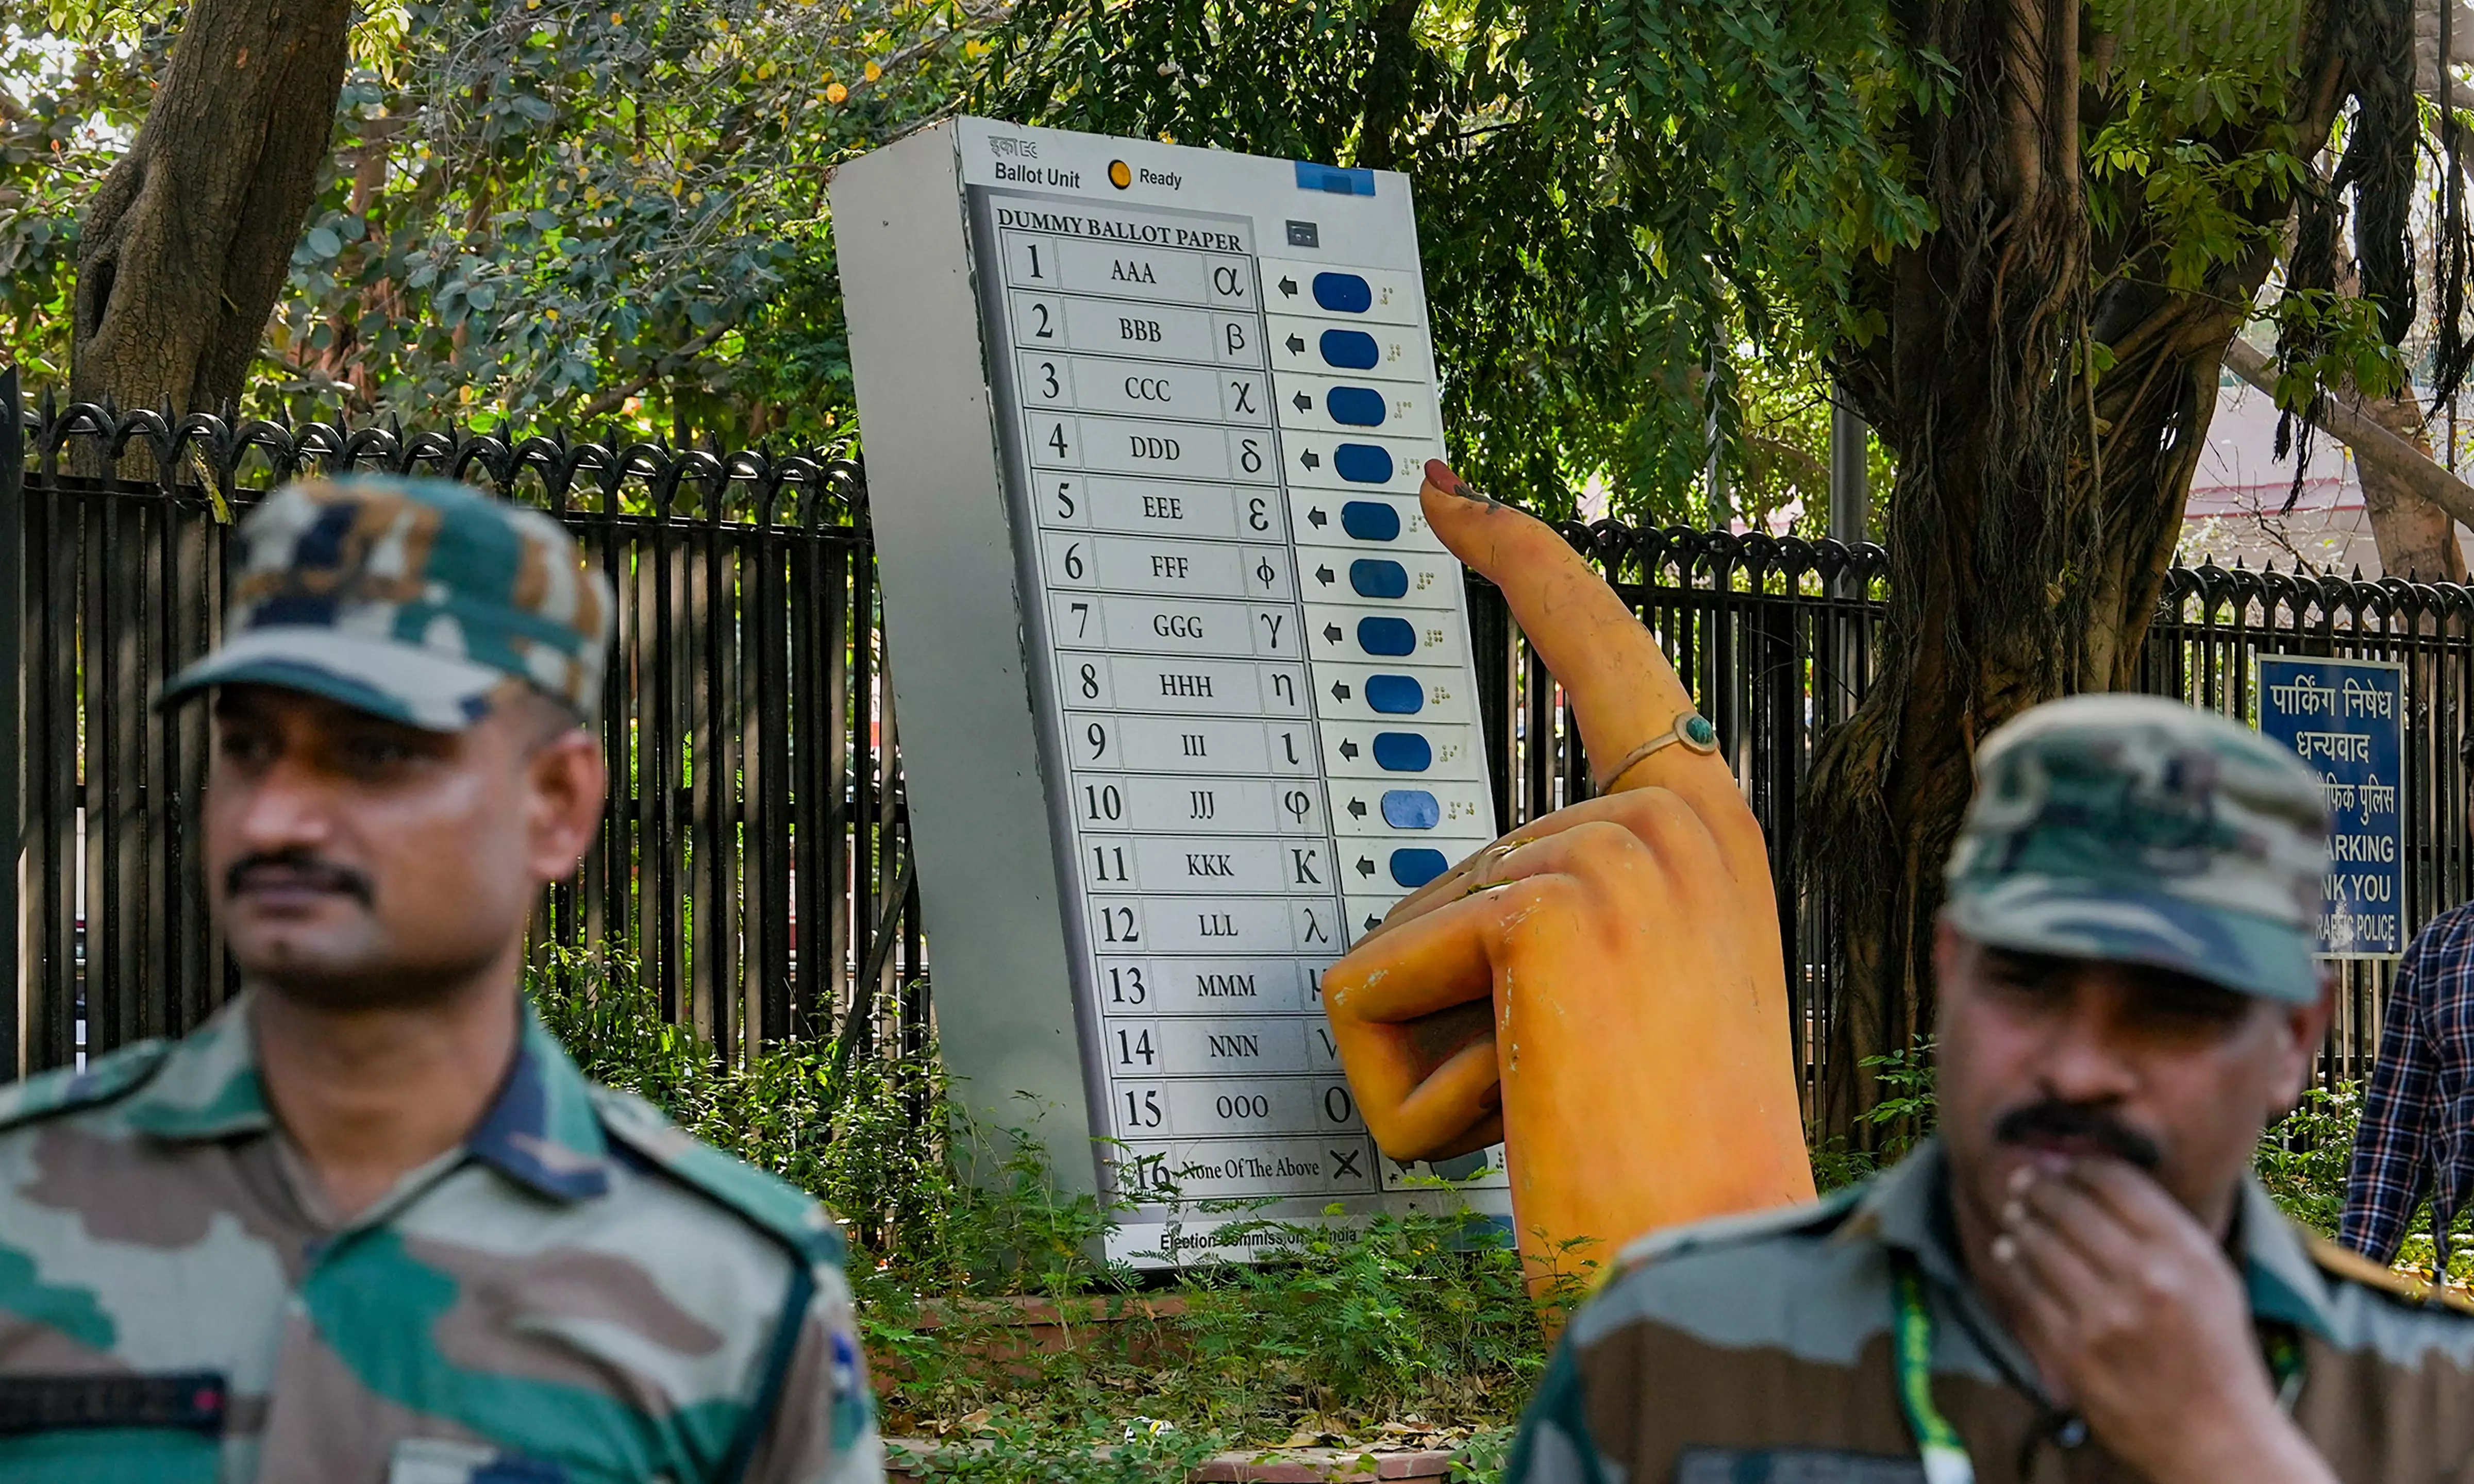 Reports of EVMs showing extra vote to BJP in mock poll in Kasargod are false: EC